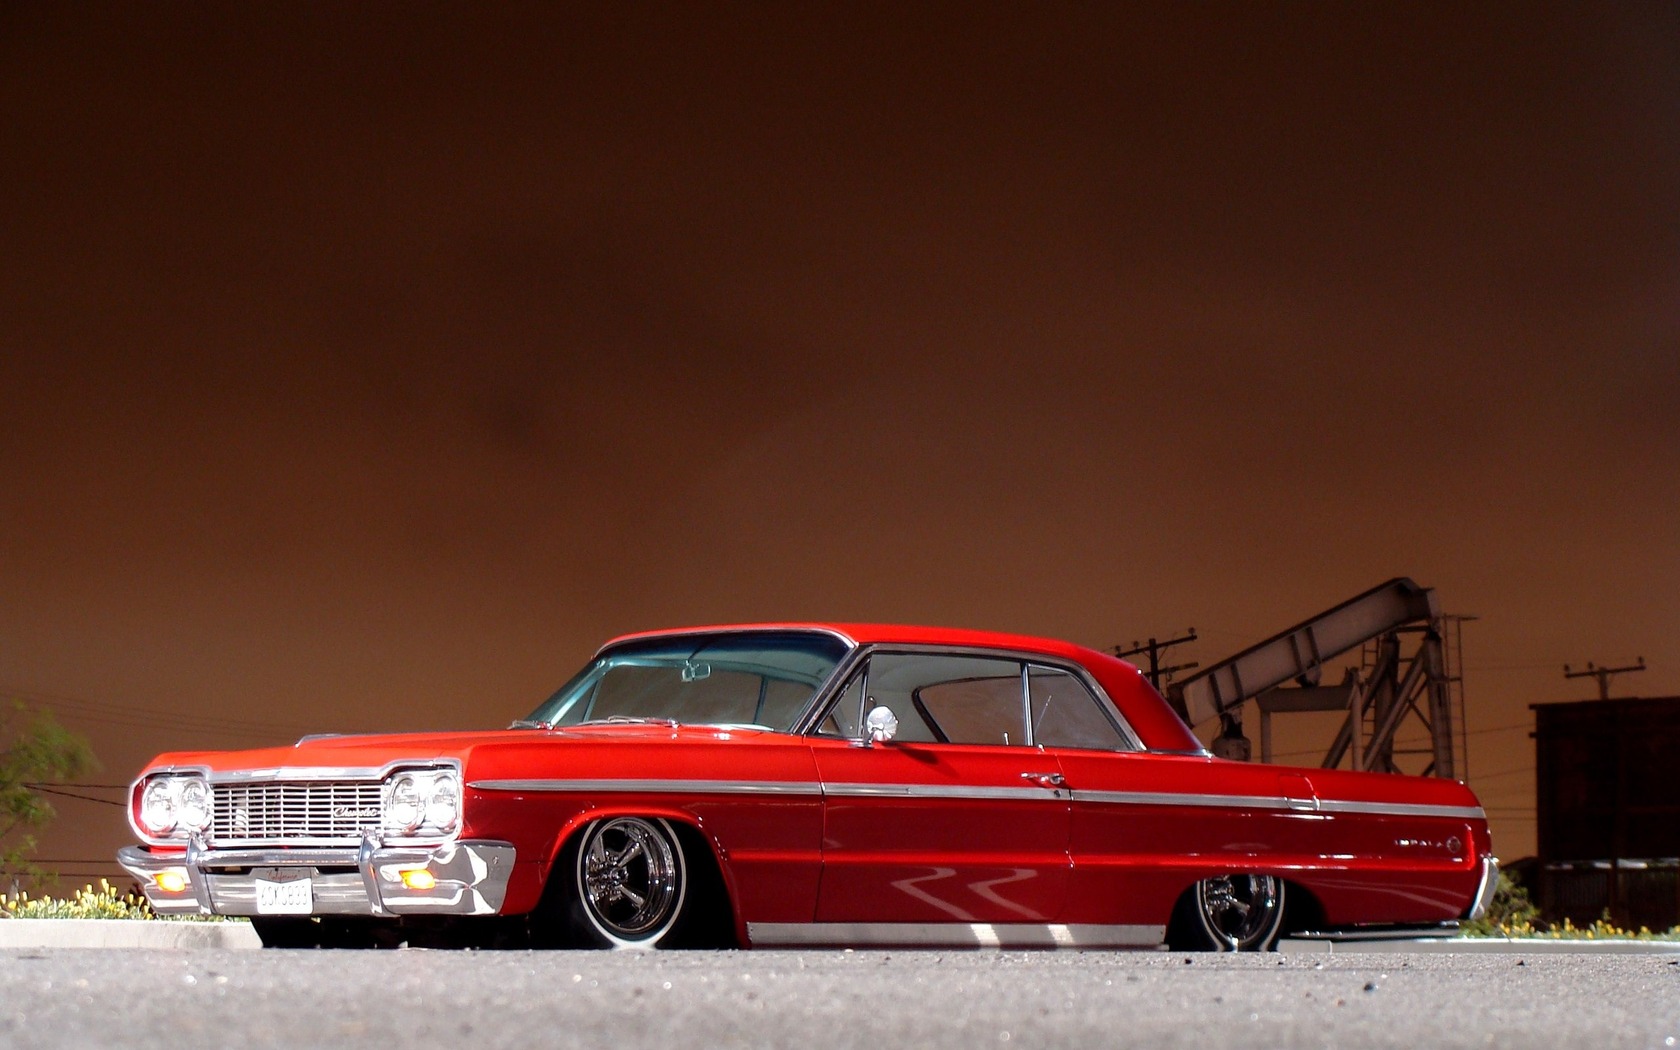 Lowrider Cars Wallpapers Images amp Pictures   Becuo